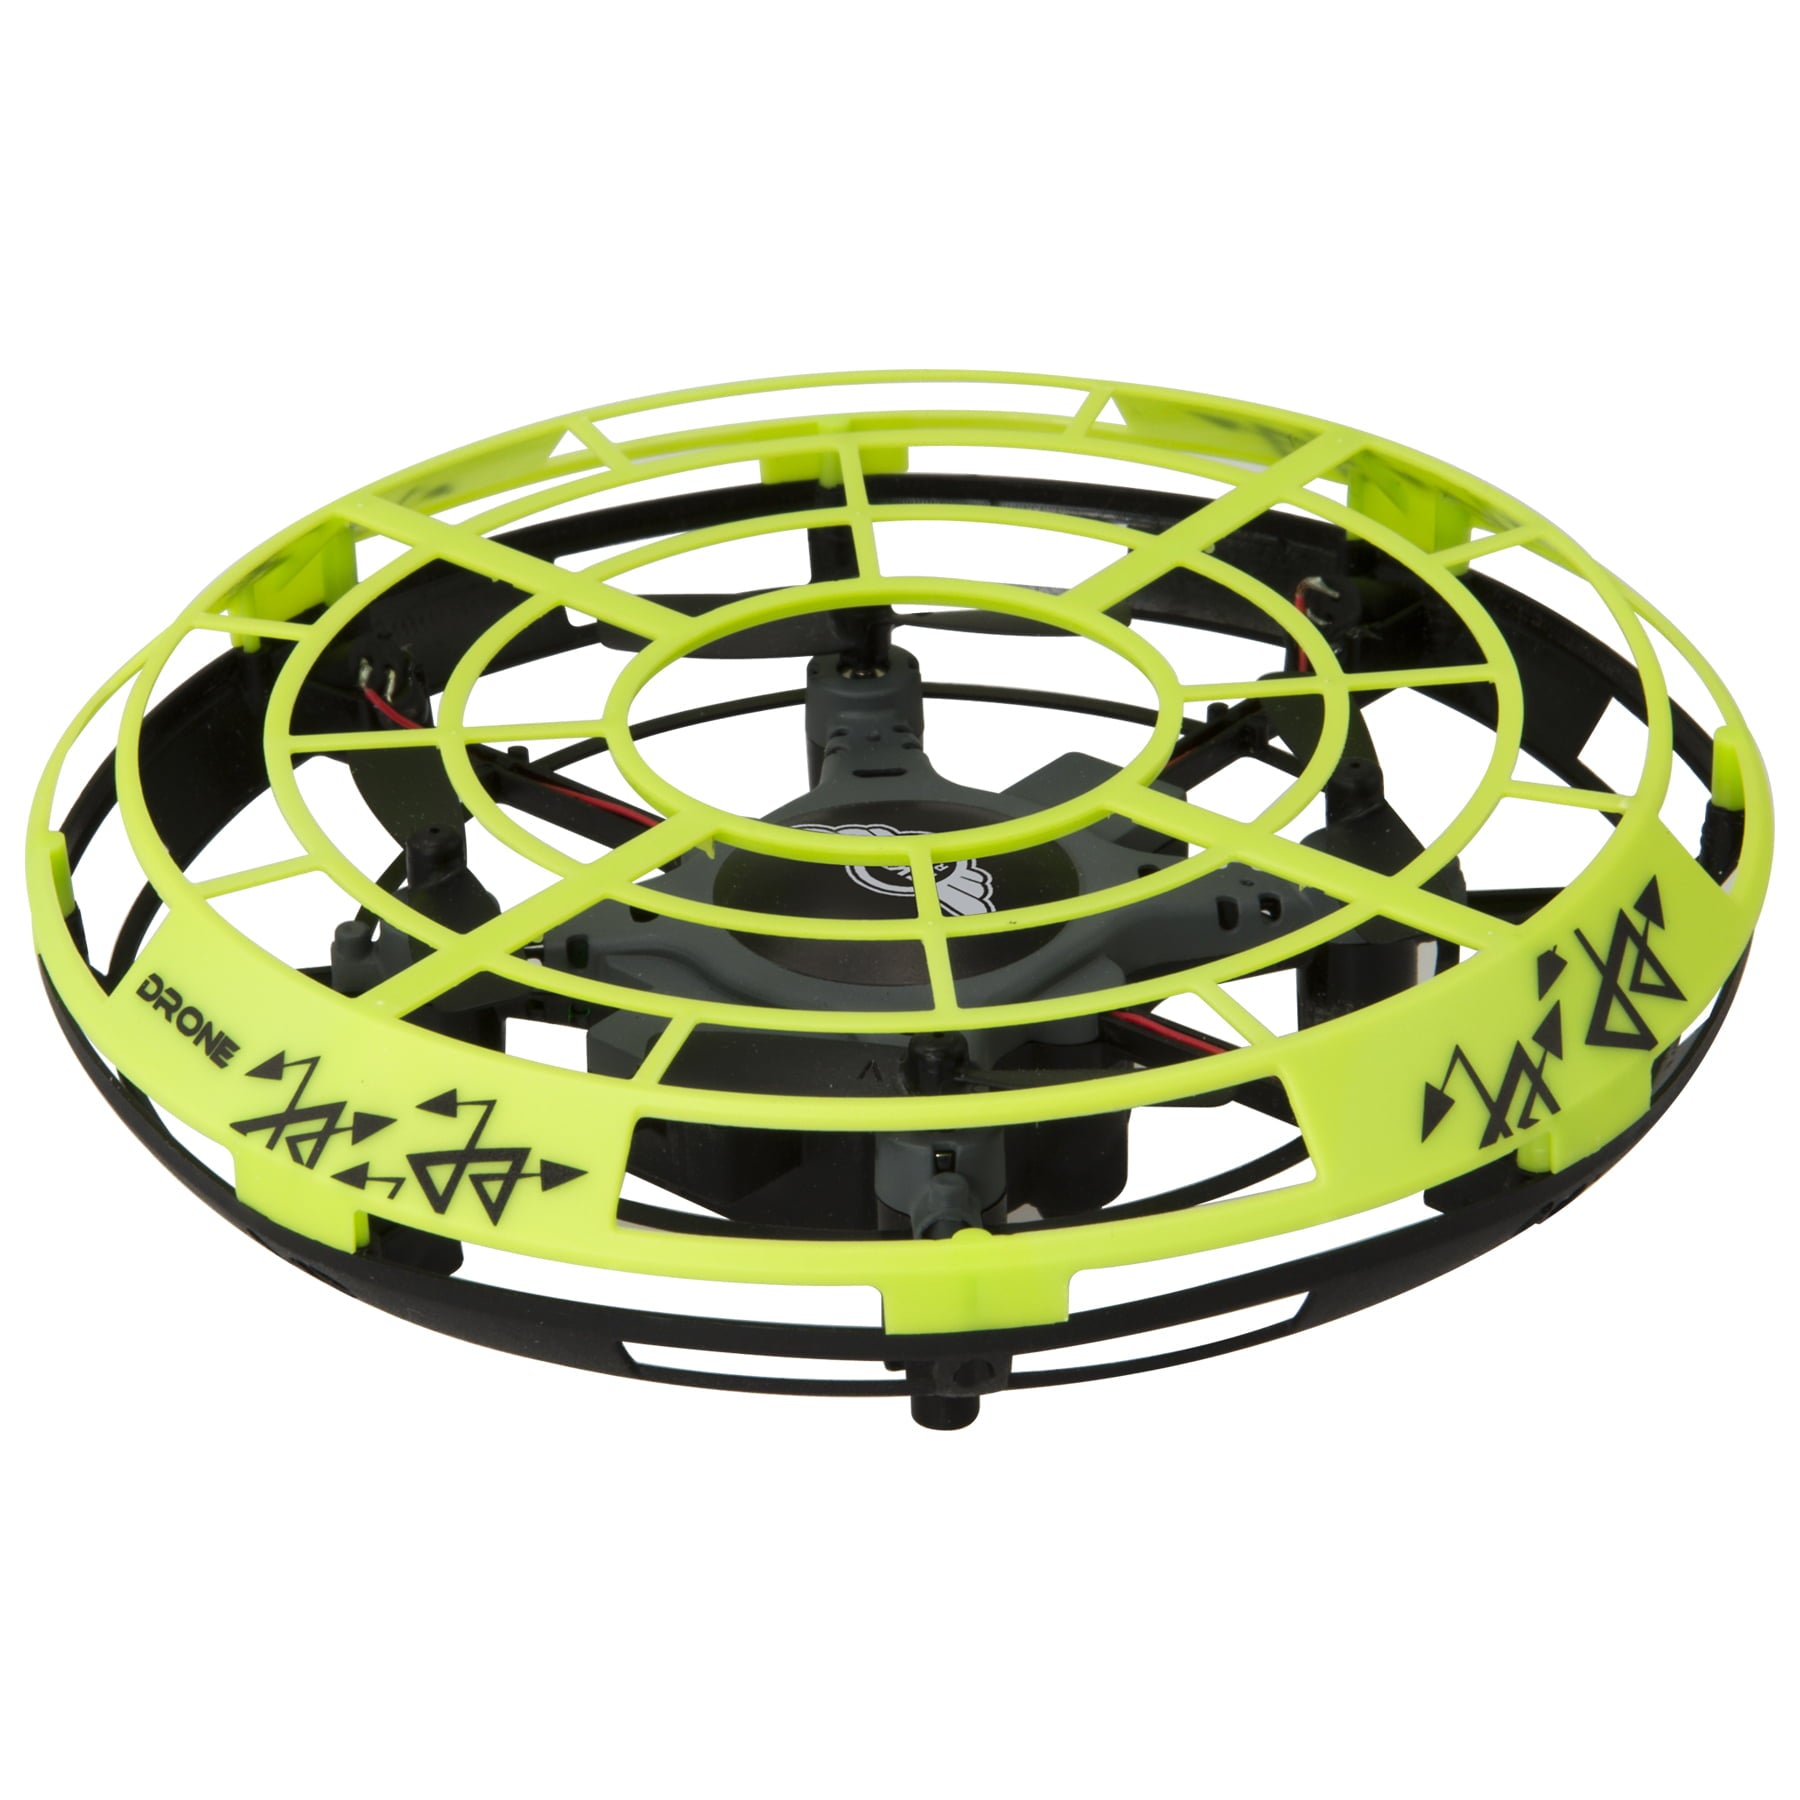 Sky Rider Satellite Obstacle Avoidance Drone DR159GN, Green